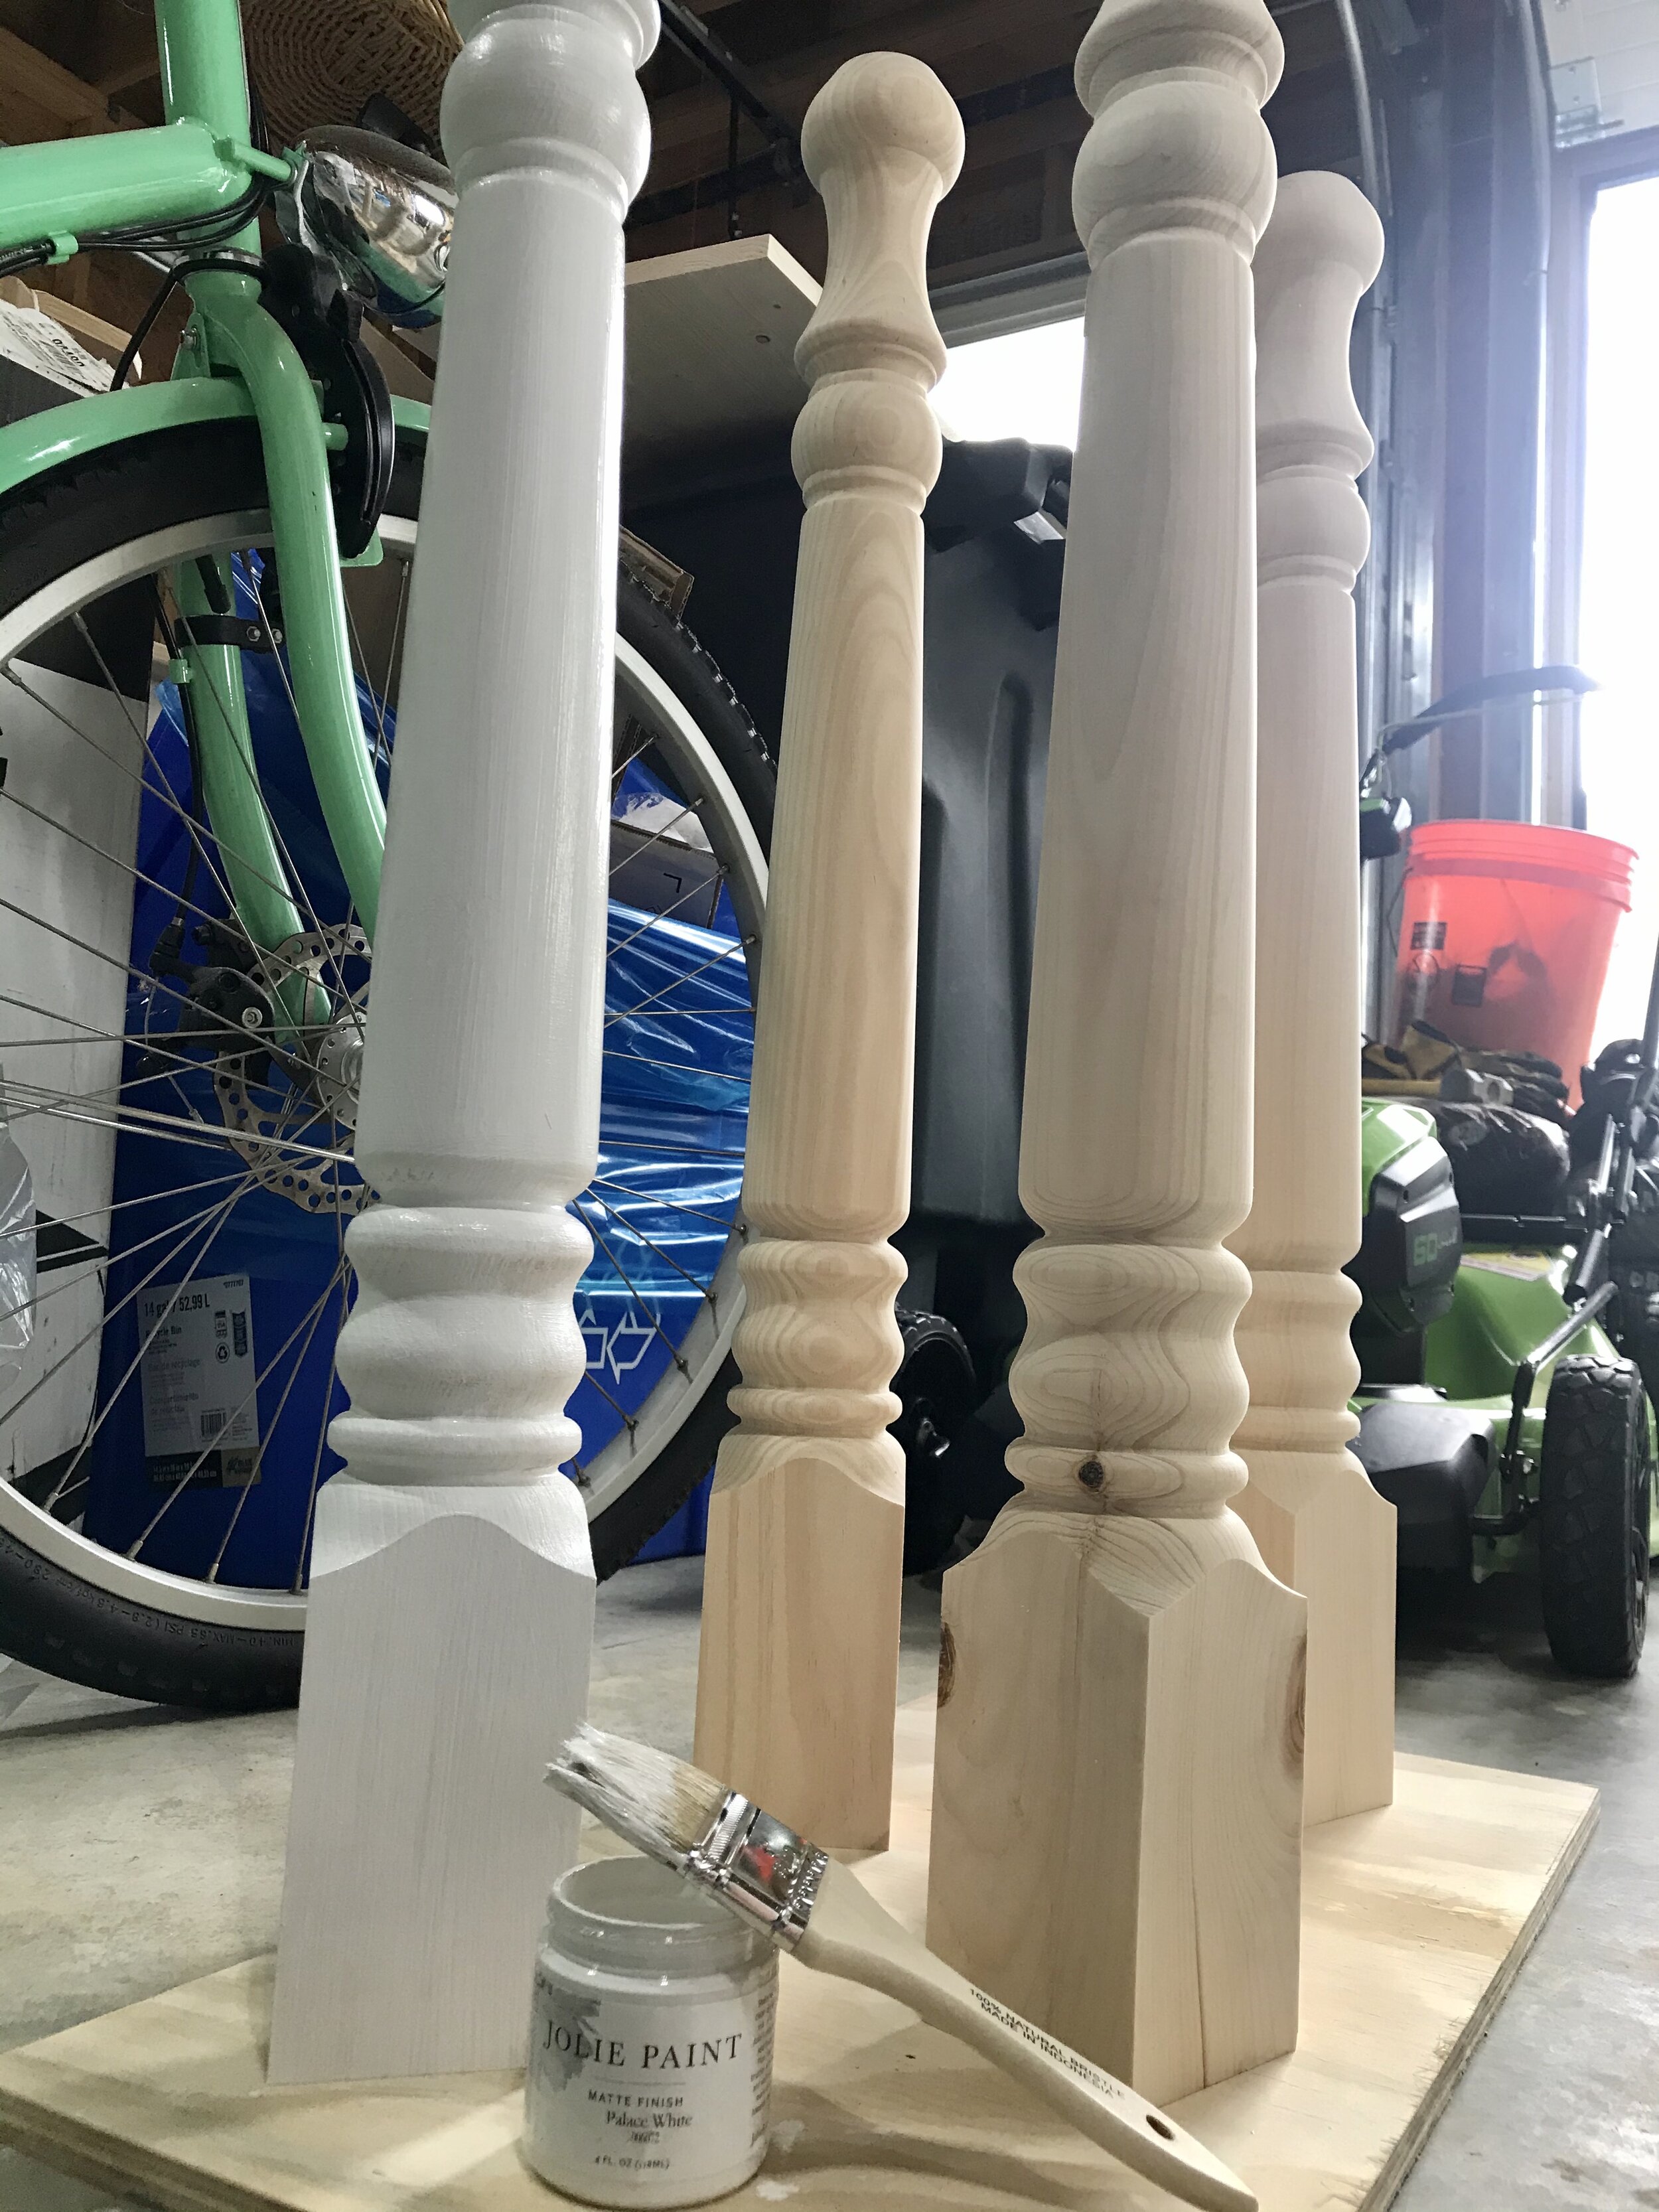 New table legs for an old table top